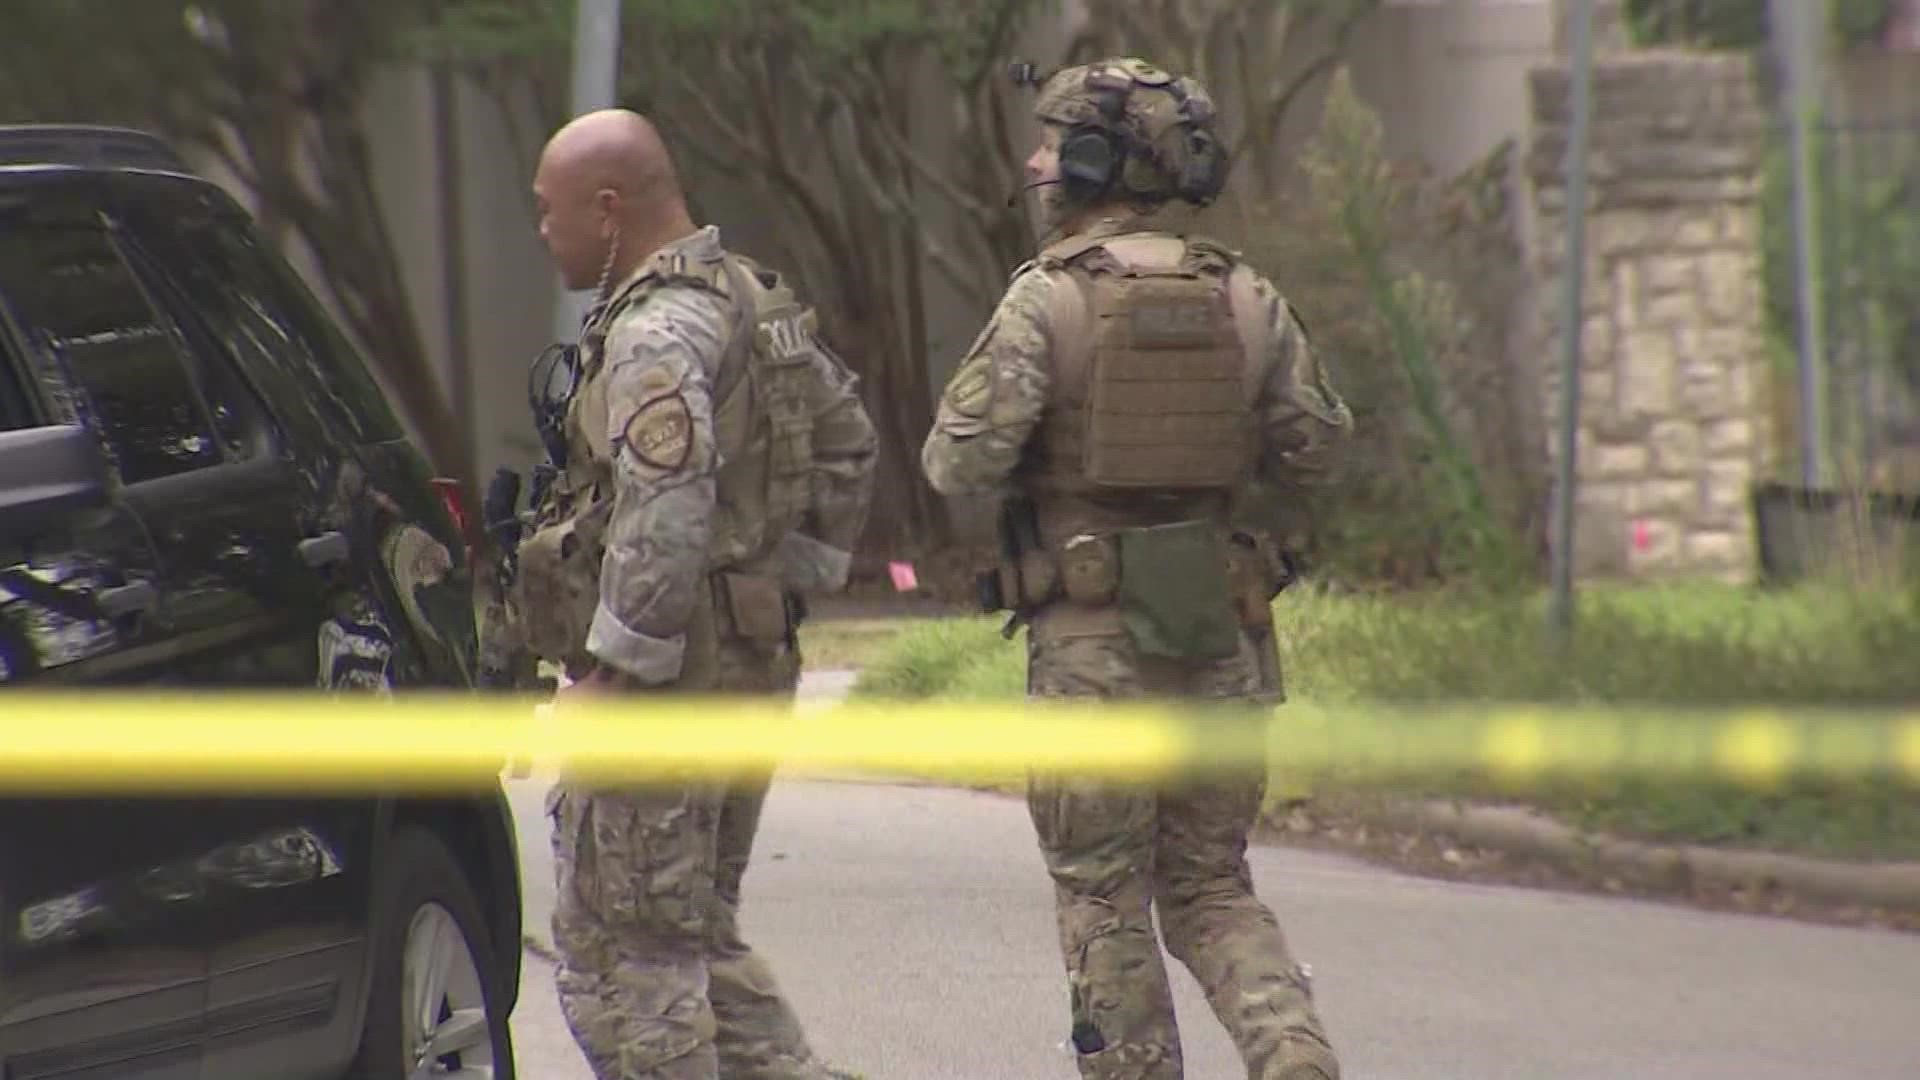 There was a large police presence outside a home in River Oaks in Houston on Thursday.